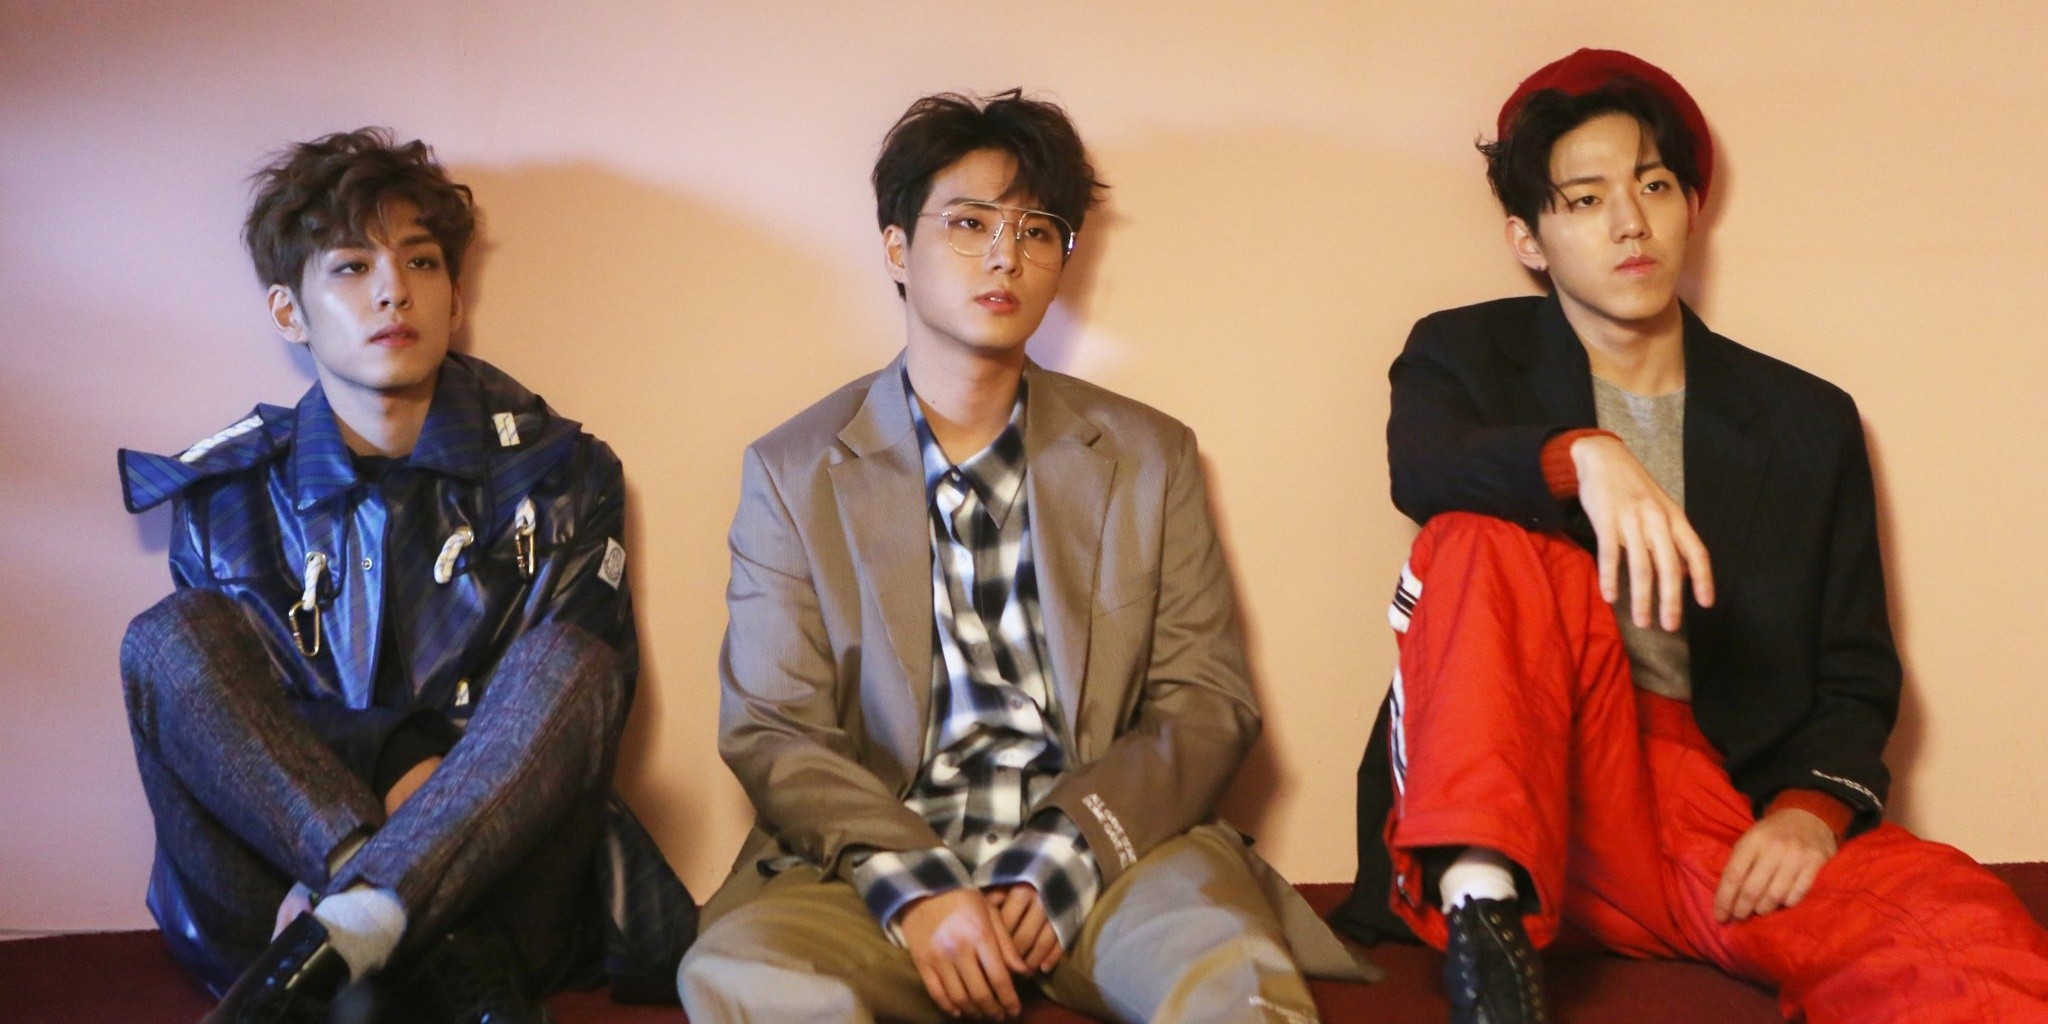 DAY6 to debut sub-unit with Young K, Wonpil, and Dowoon in late August